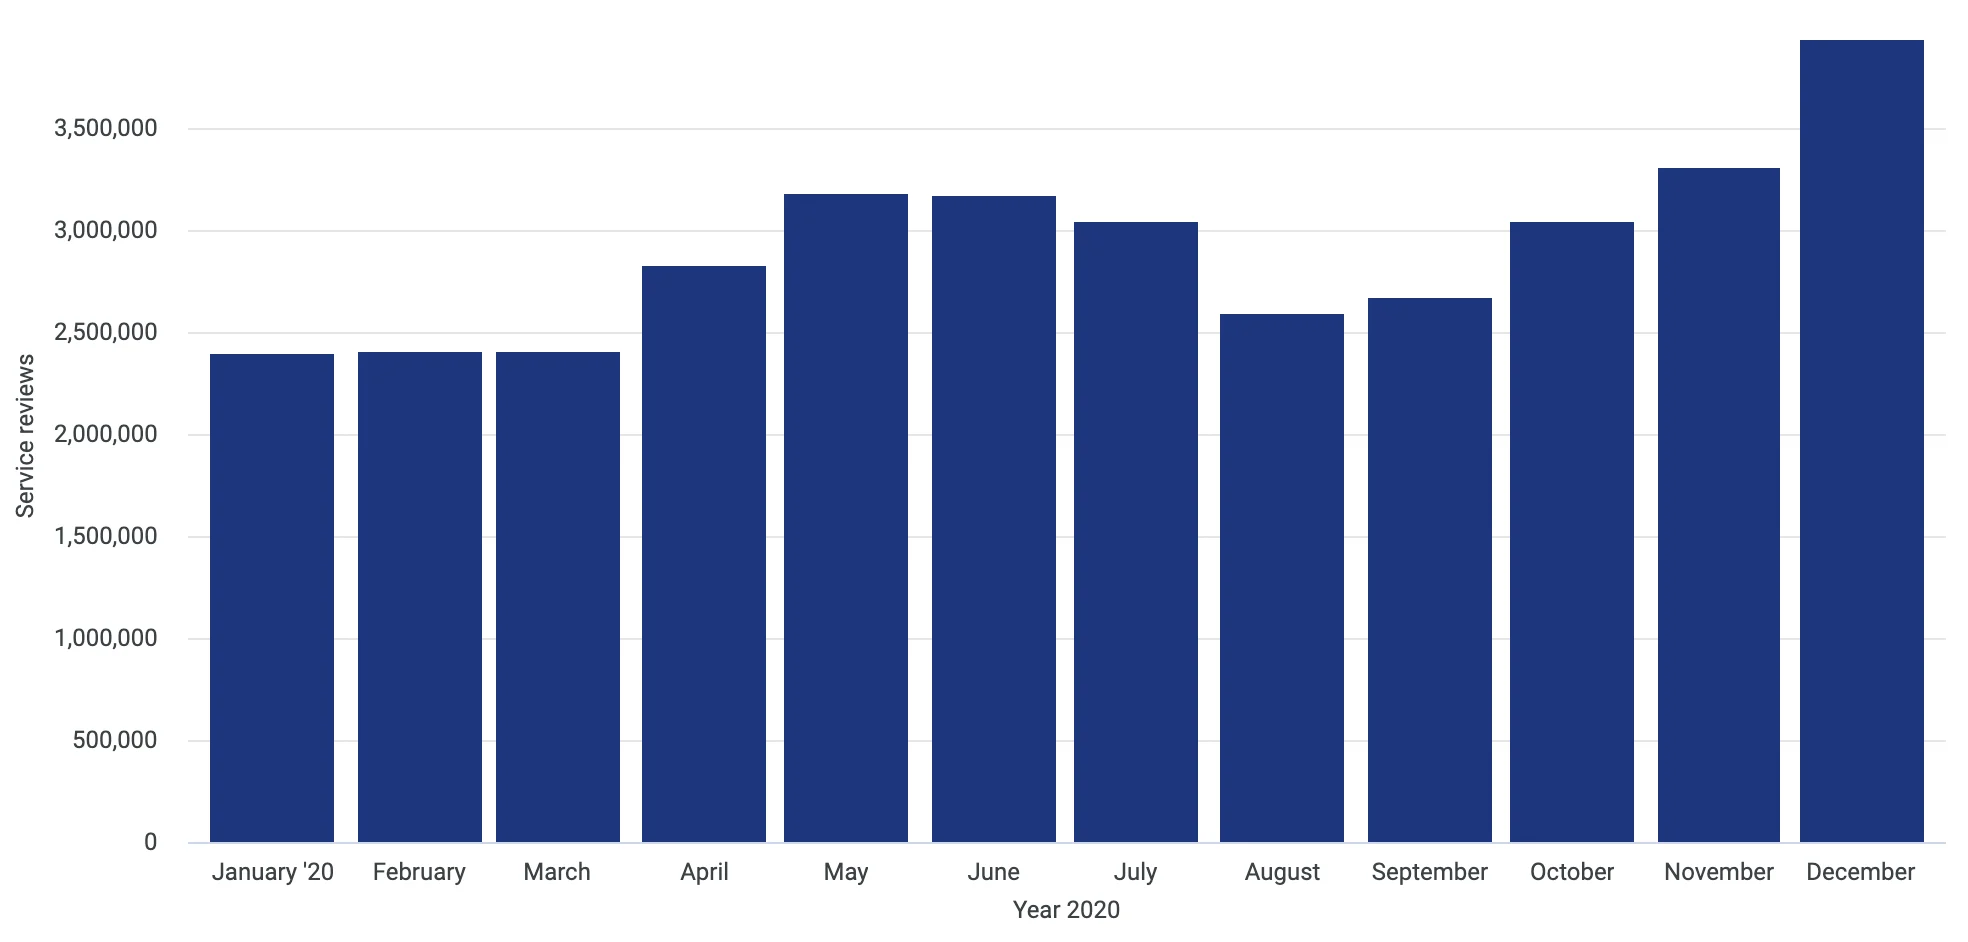 Service reviews left on Trustpilot.com between January 1st 2020 and December 31st 2020. Here, we can observe a significant increase in service reviews from October onwards. 